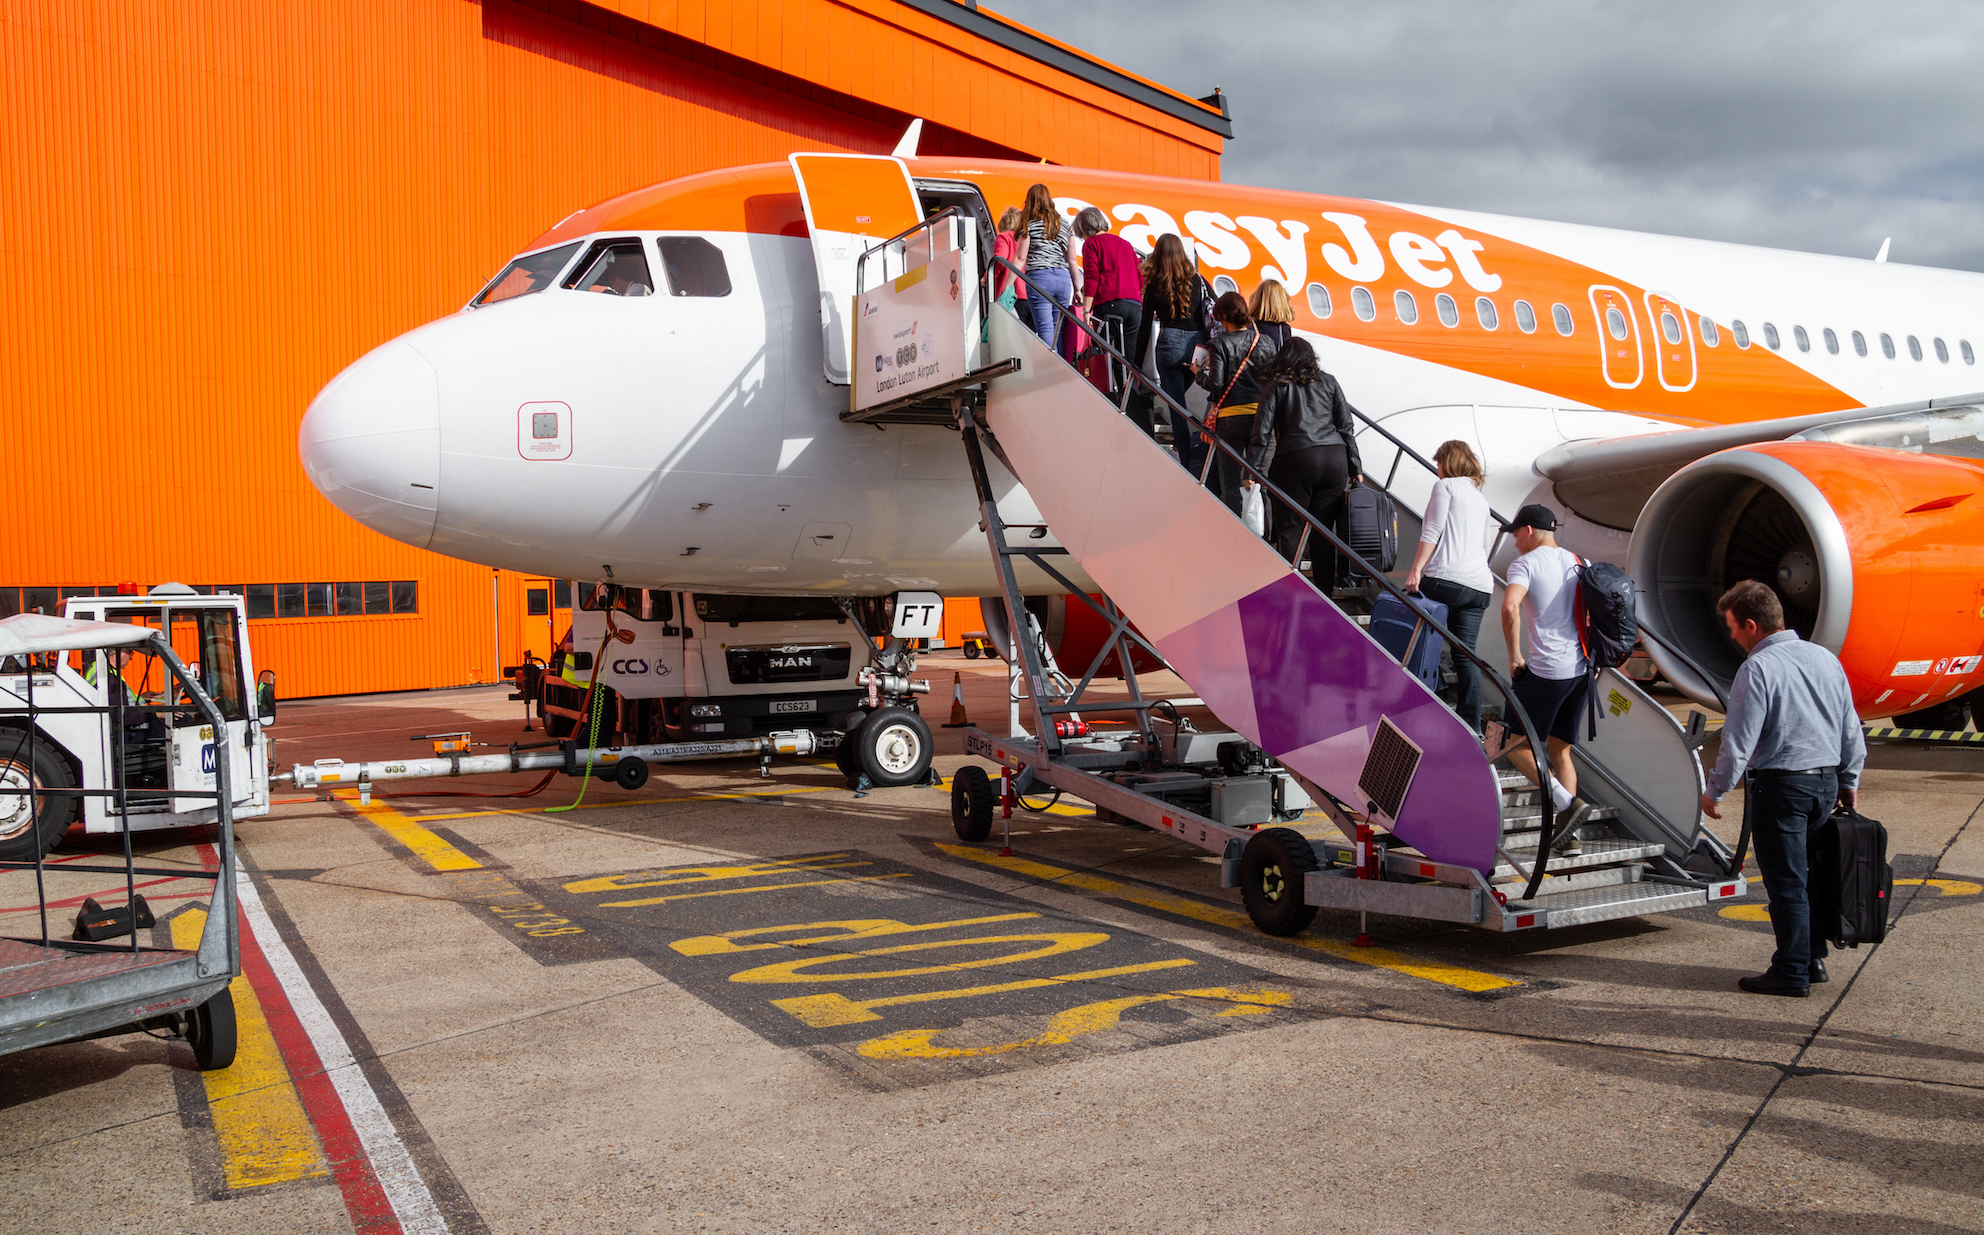 Easyjet to increase luggage costs for most